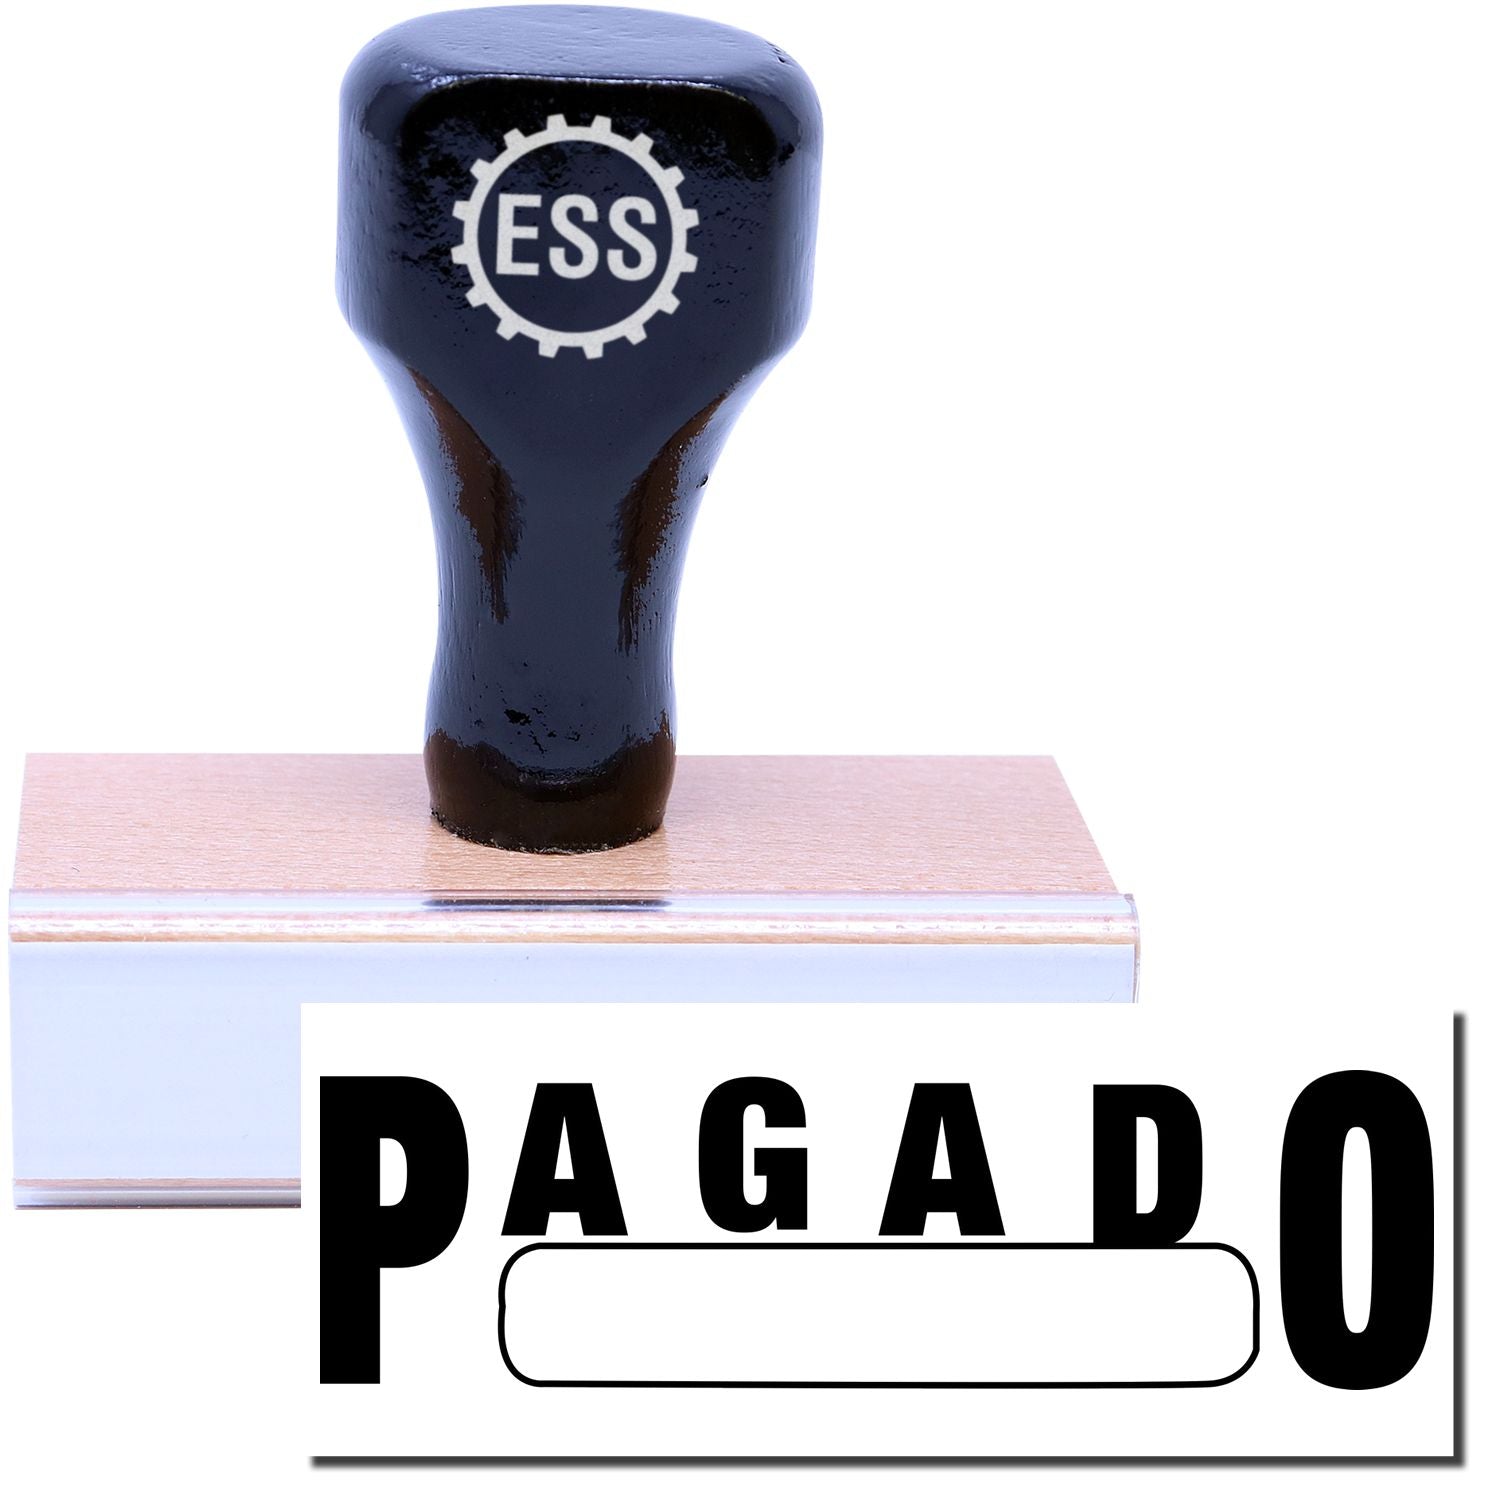 A stock office rubber stamp with a stamped image showing how the text "PAGADO" in a large font with a box is displayed after stamping.